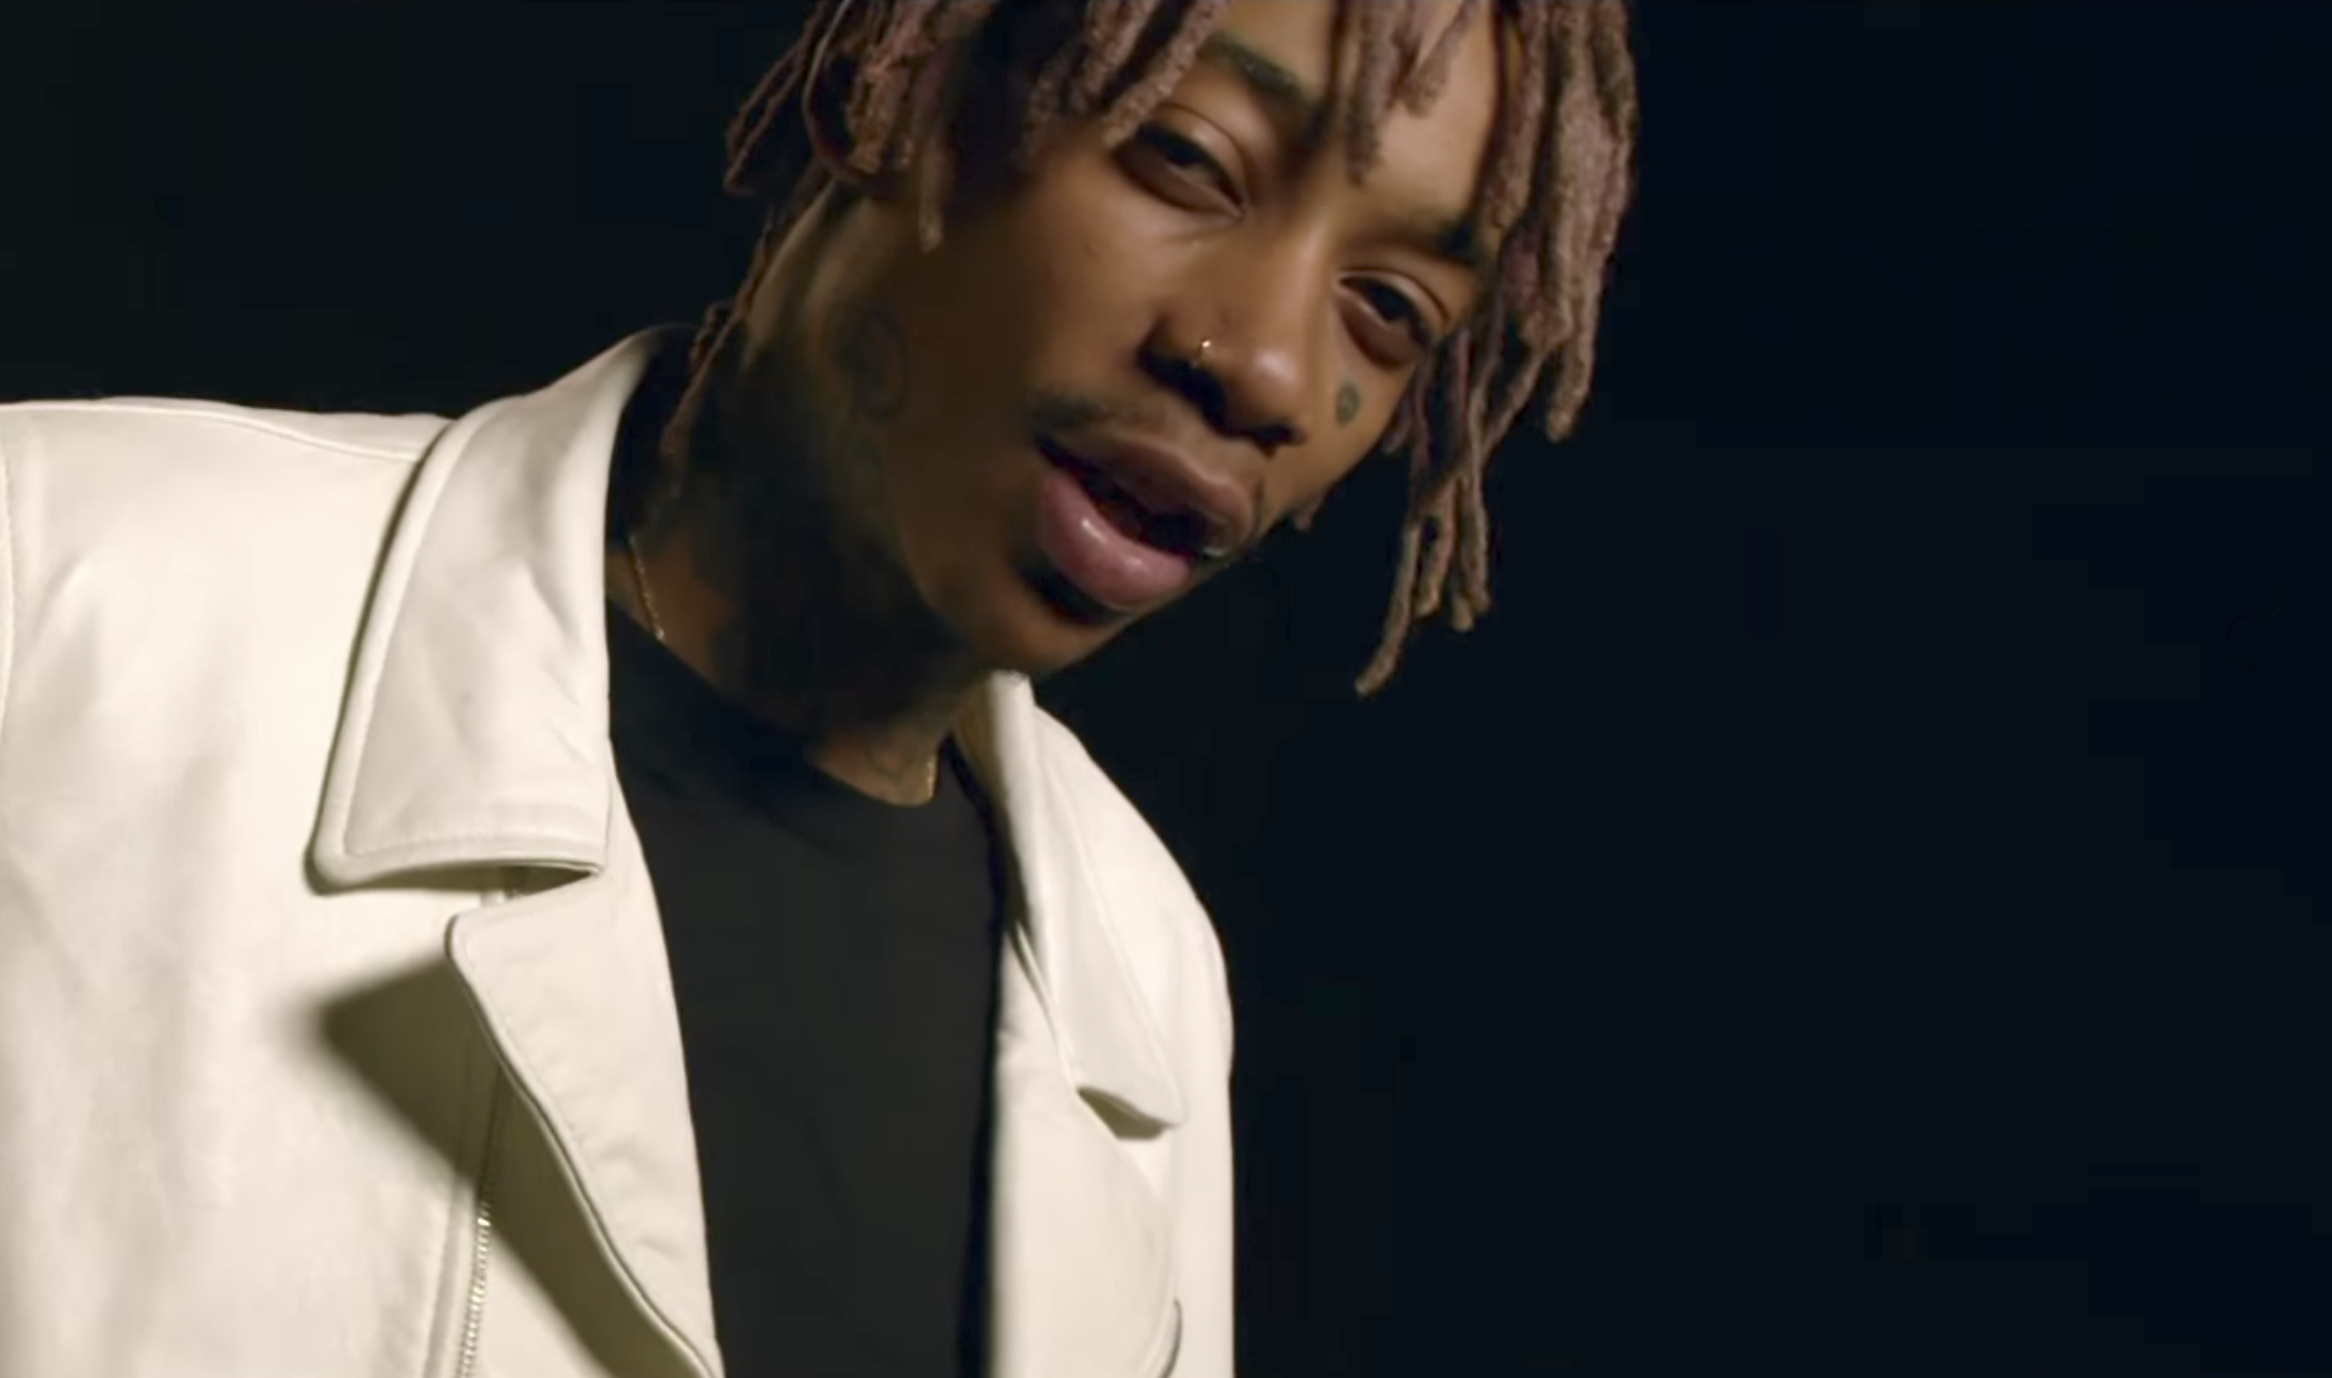 What does See You Again by Wiz Khalifa (ft. Charlie Puth) mean